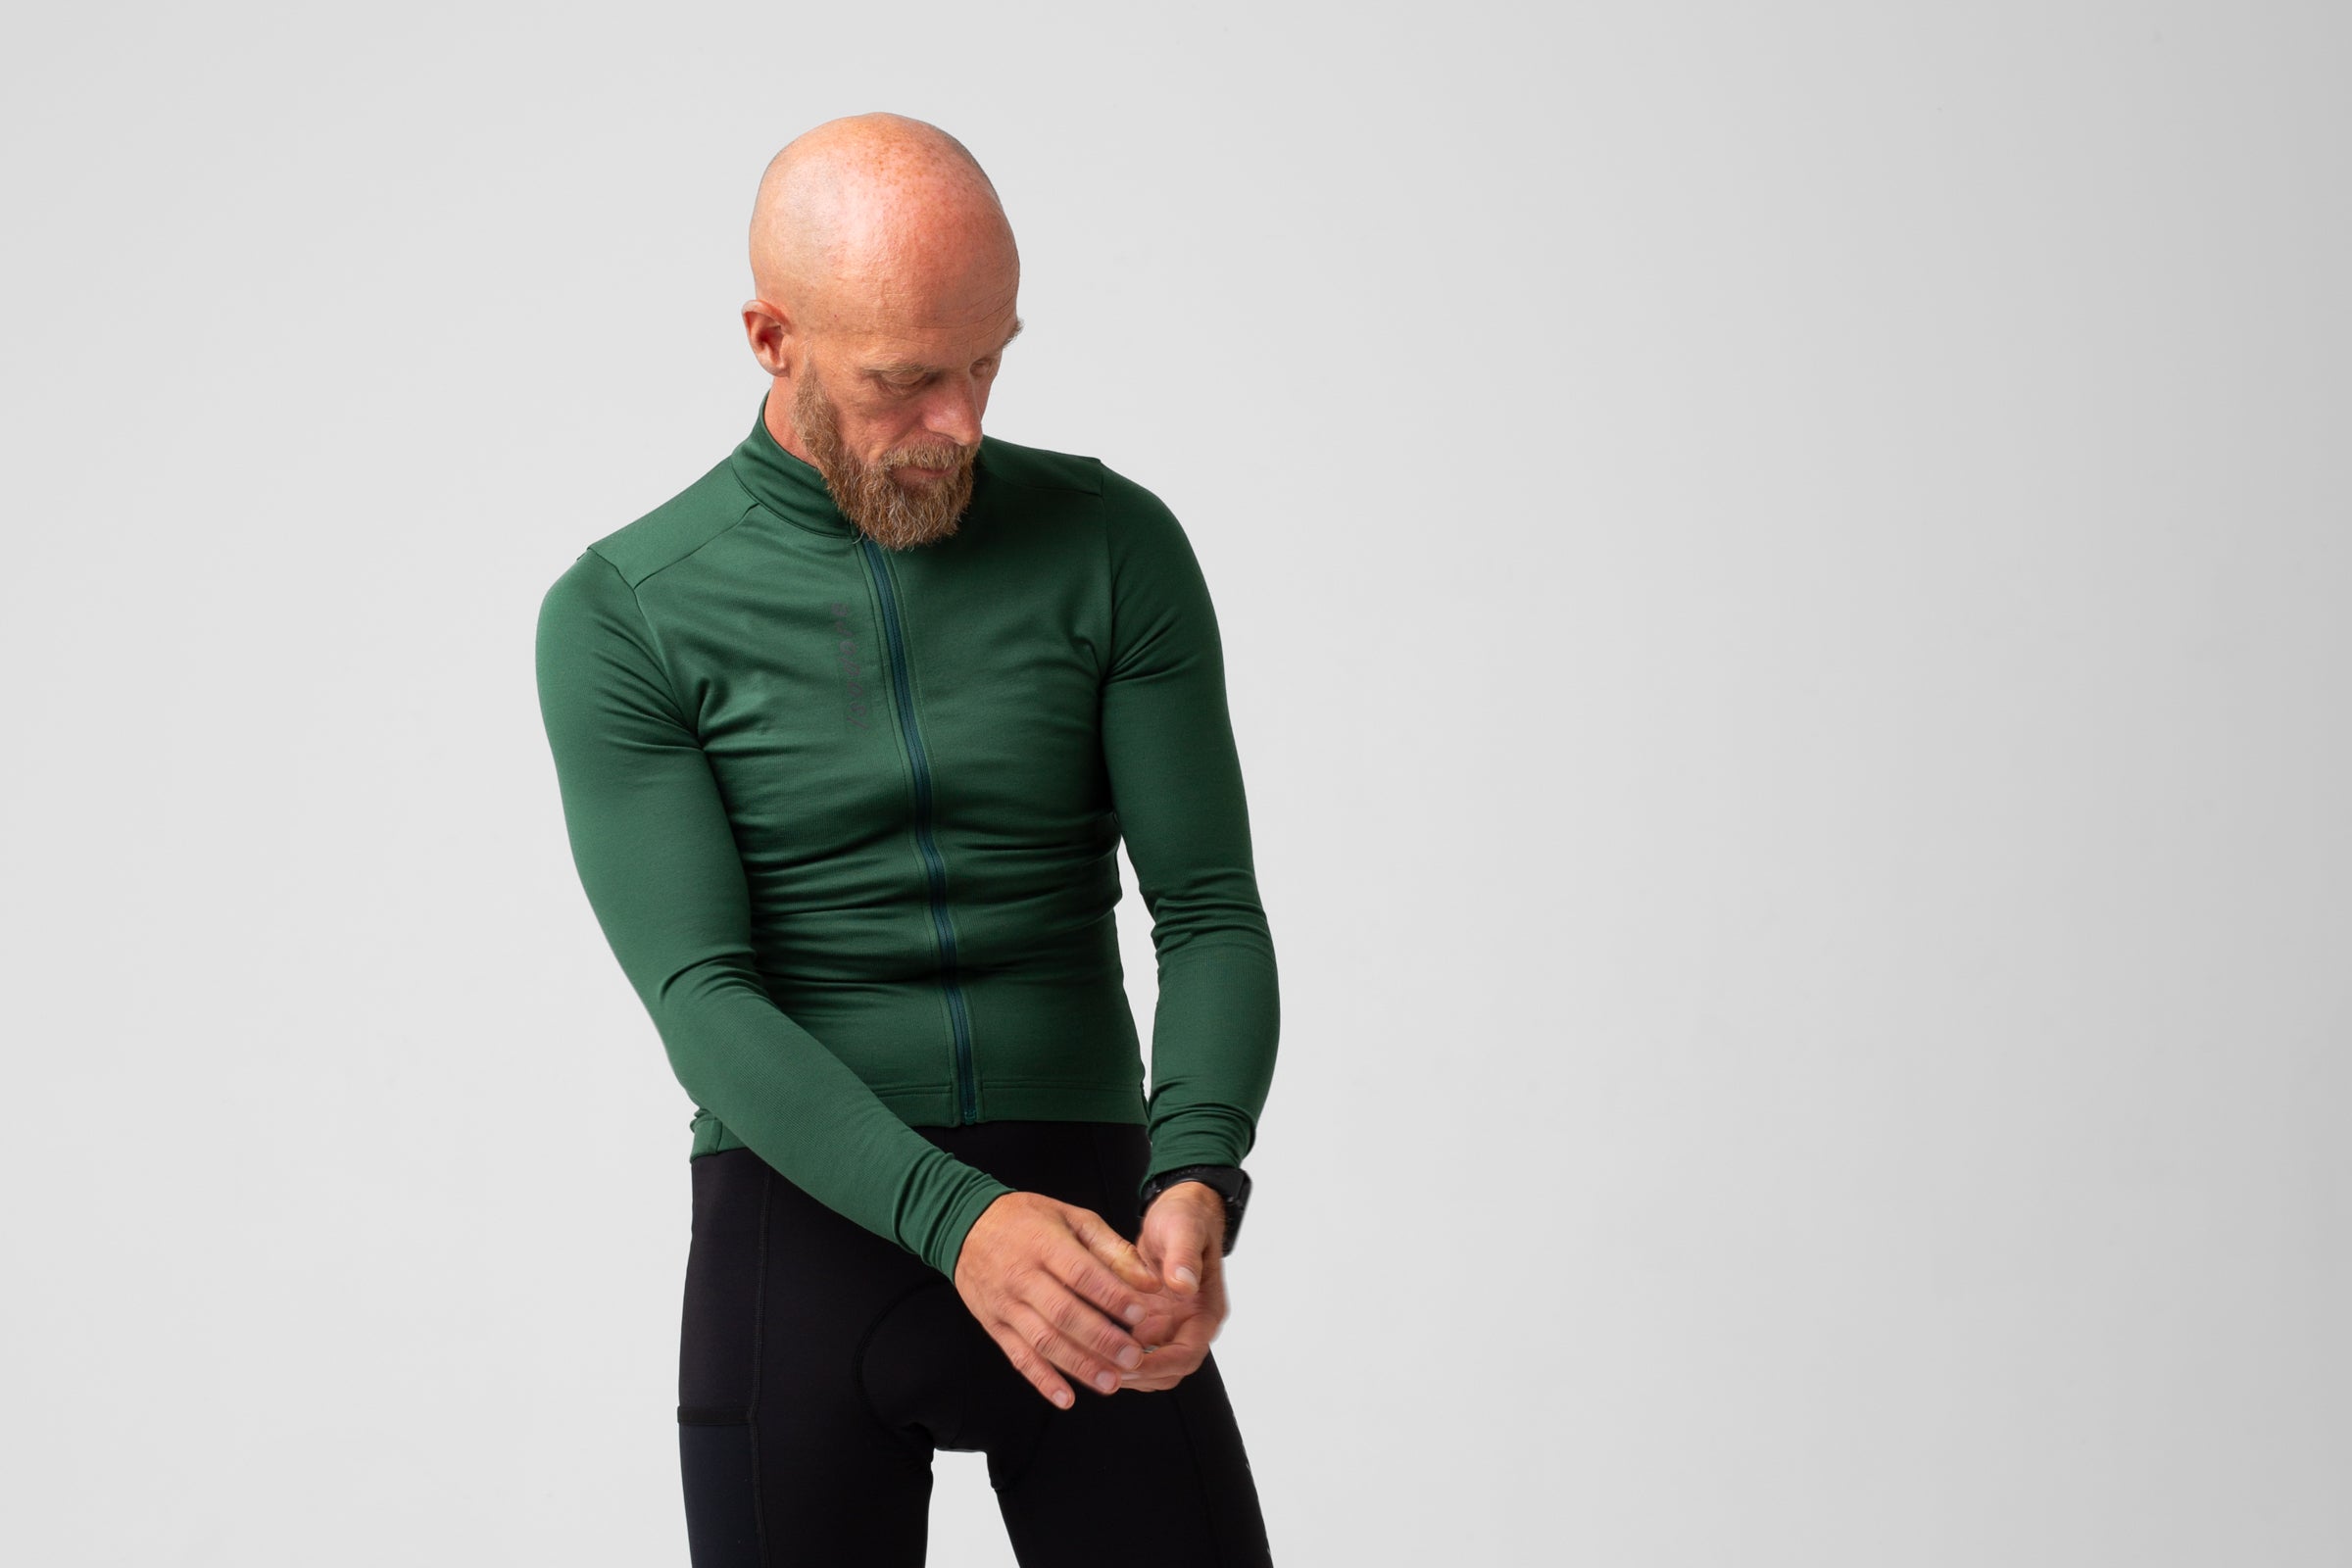 Signature Thermal Long Sleeve Jersey 2.0